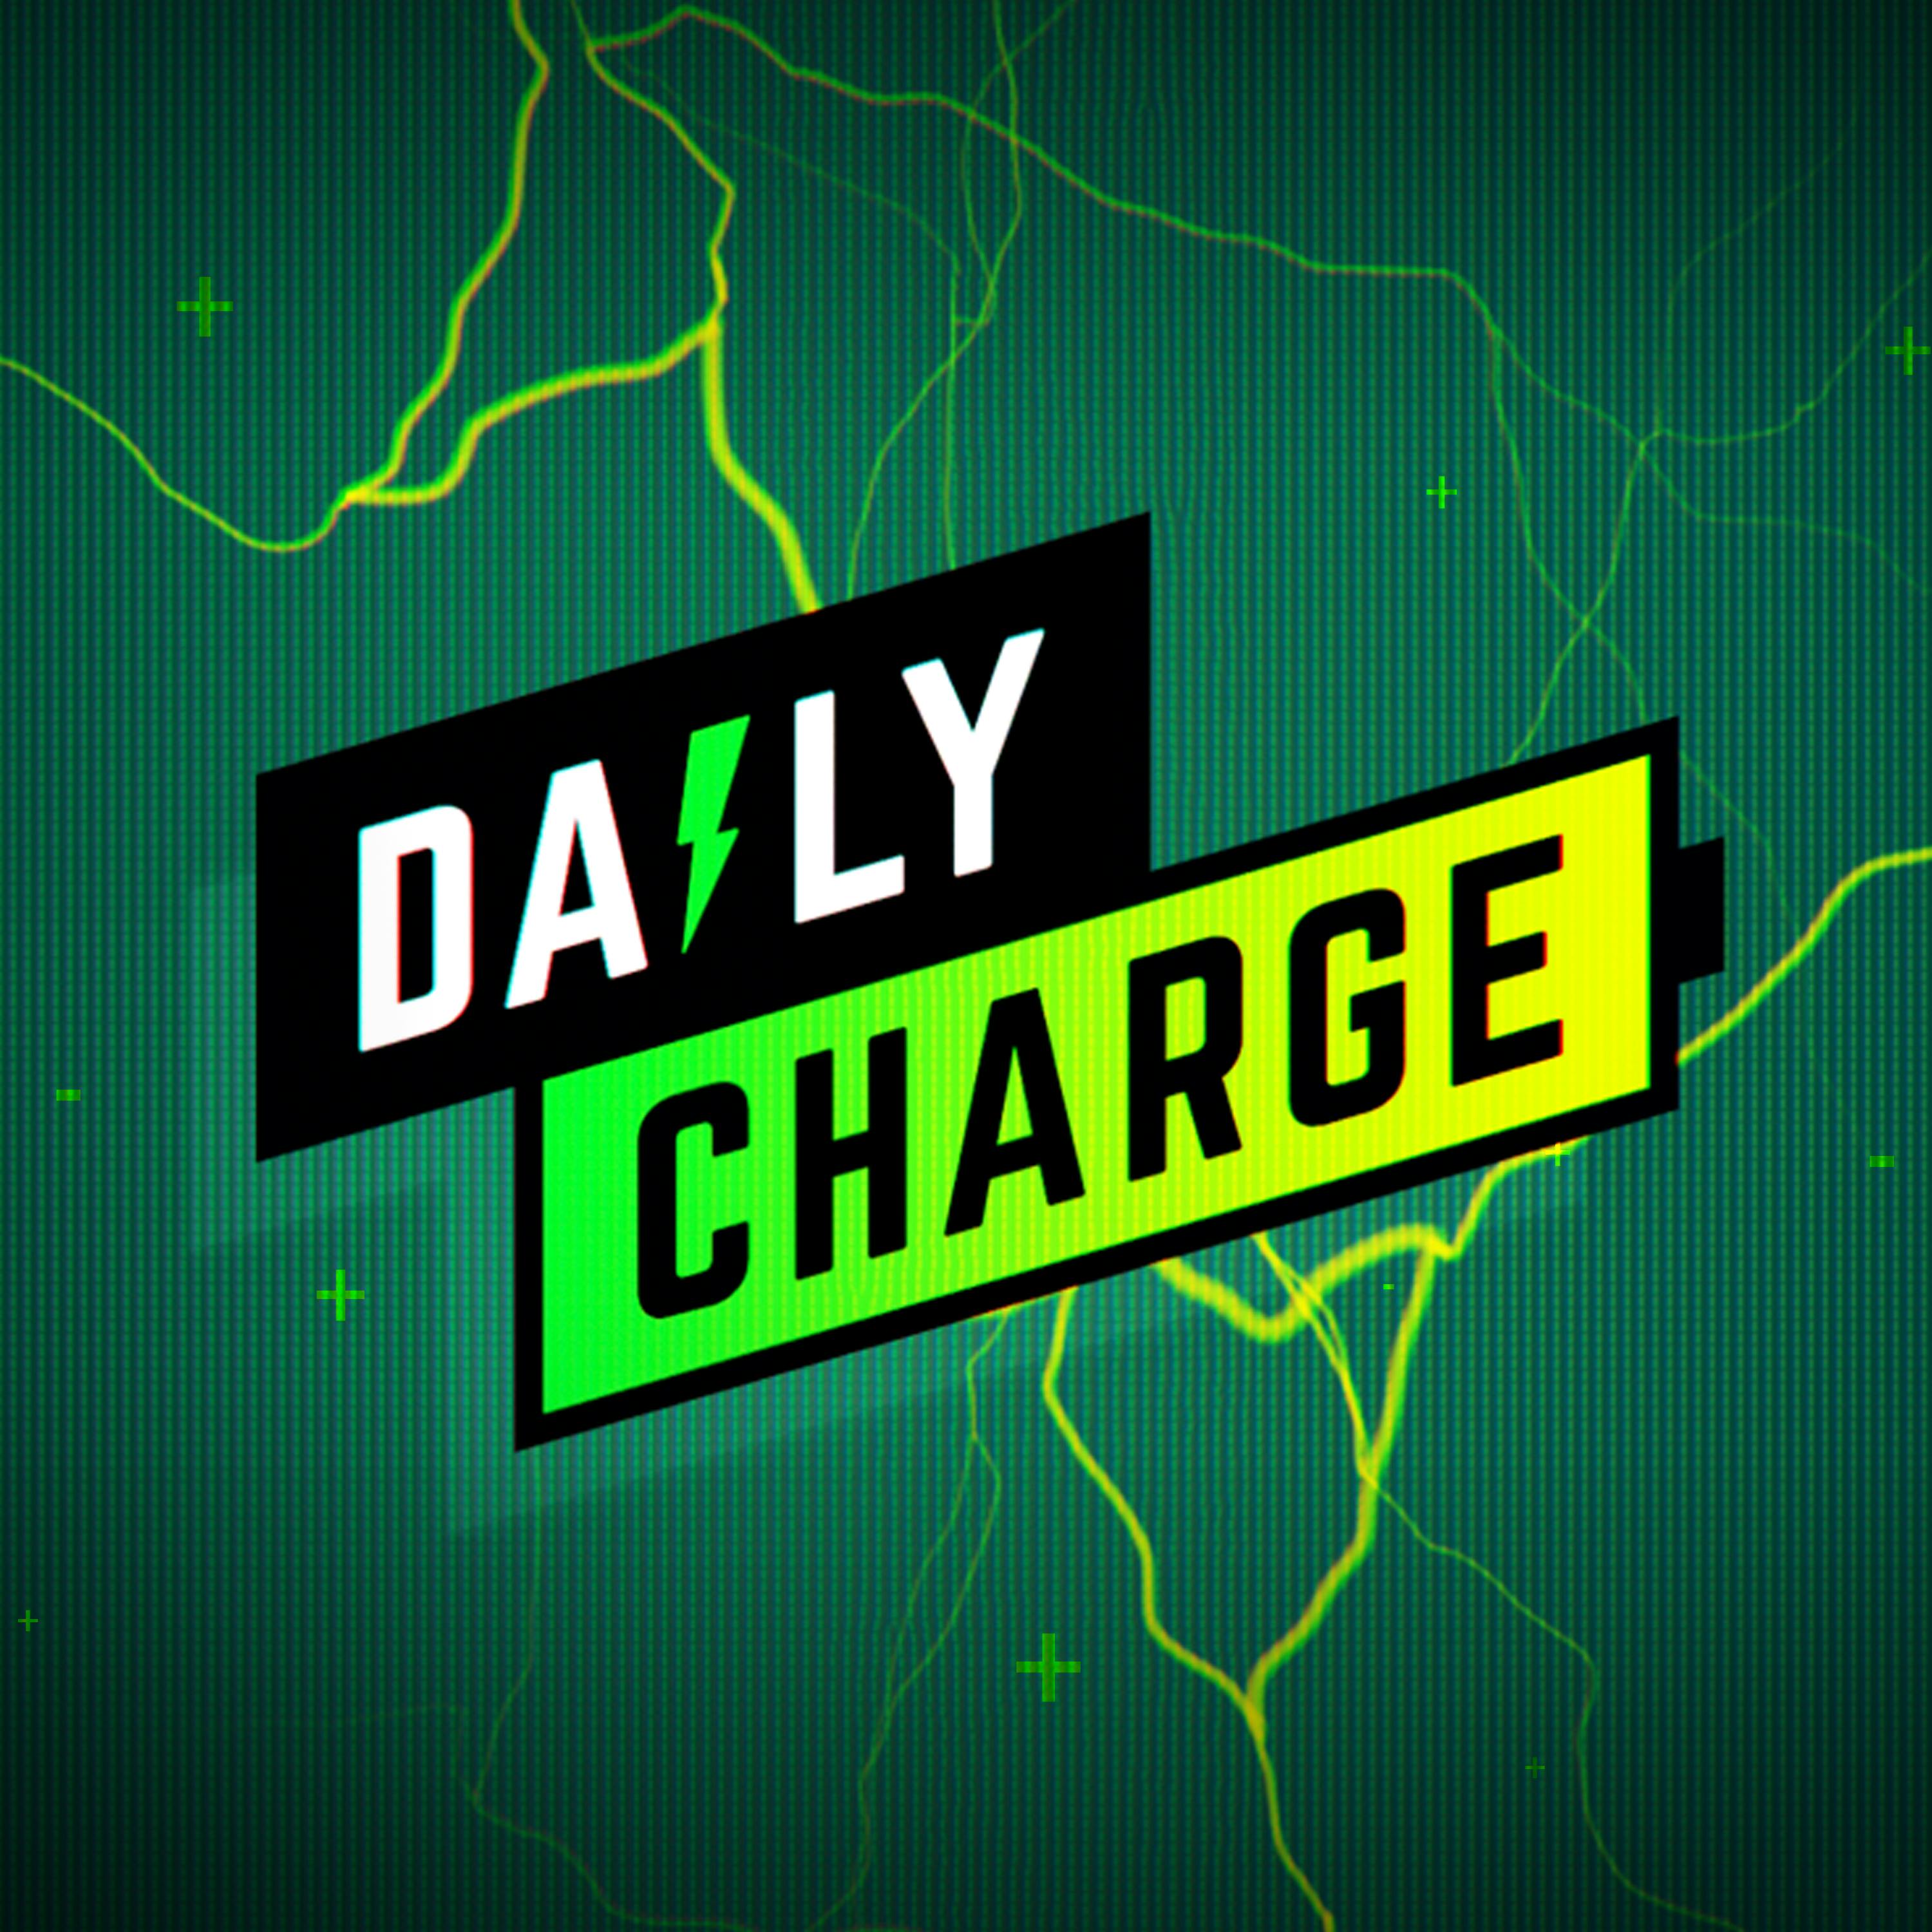 Breaking Down the Biggest News From Google I/O (The Daily Charge, 5/11/2022)